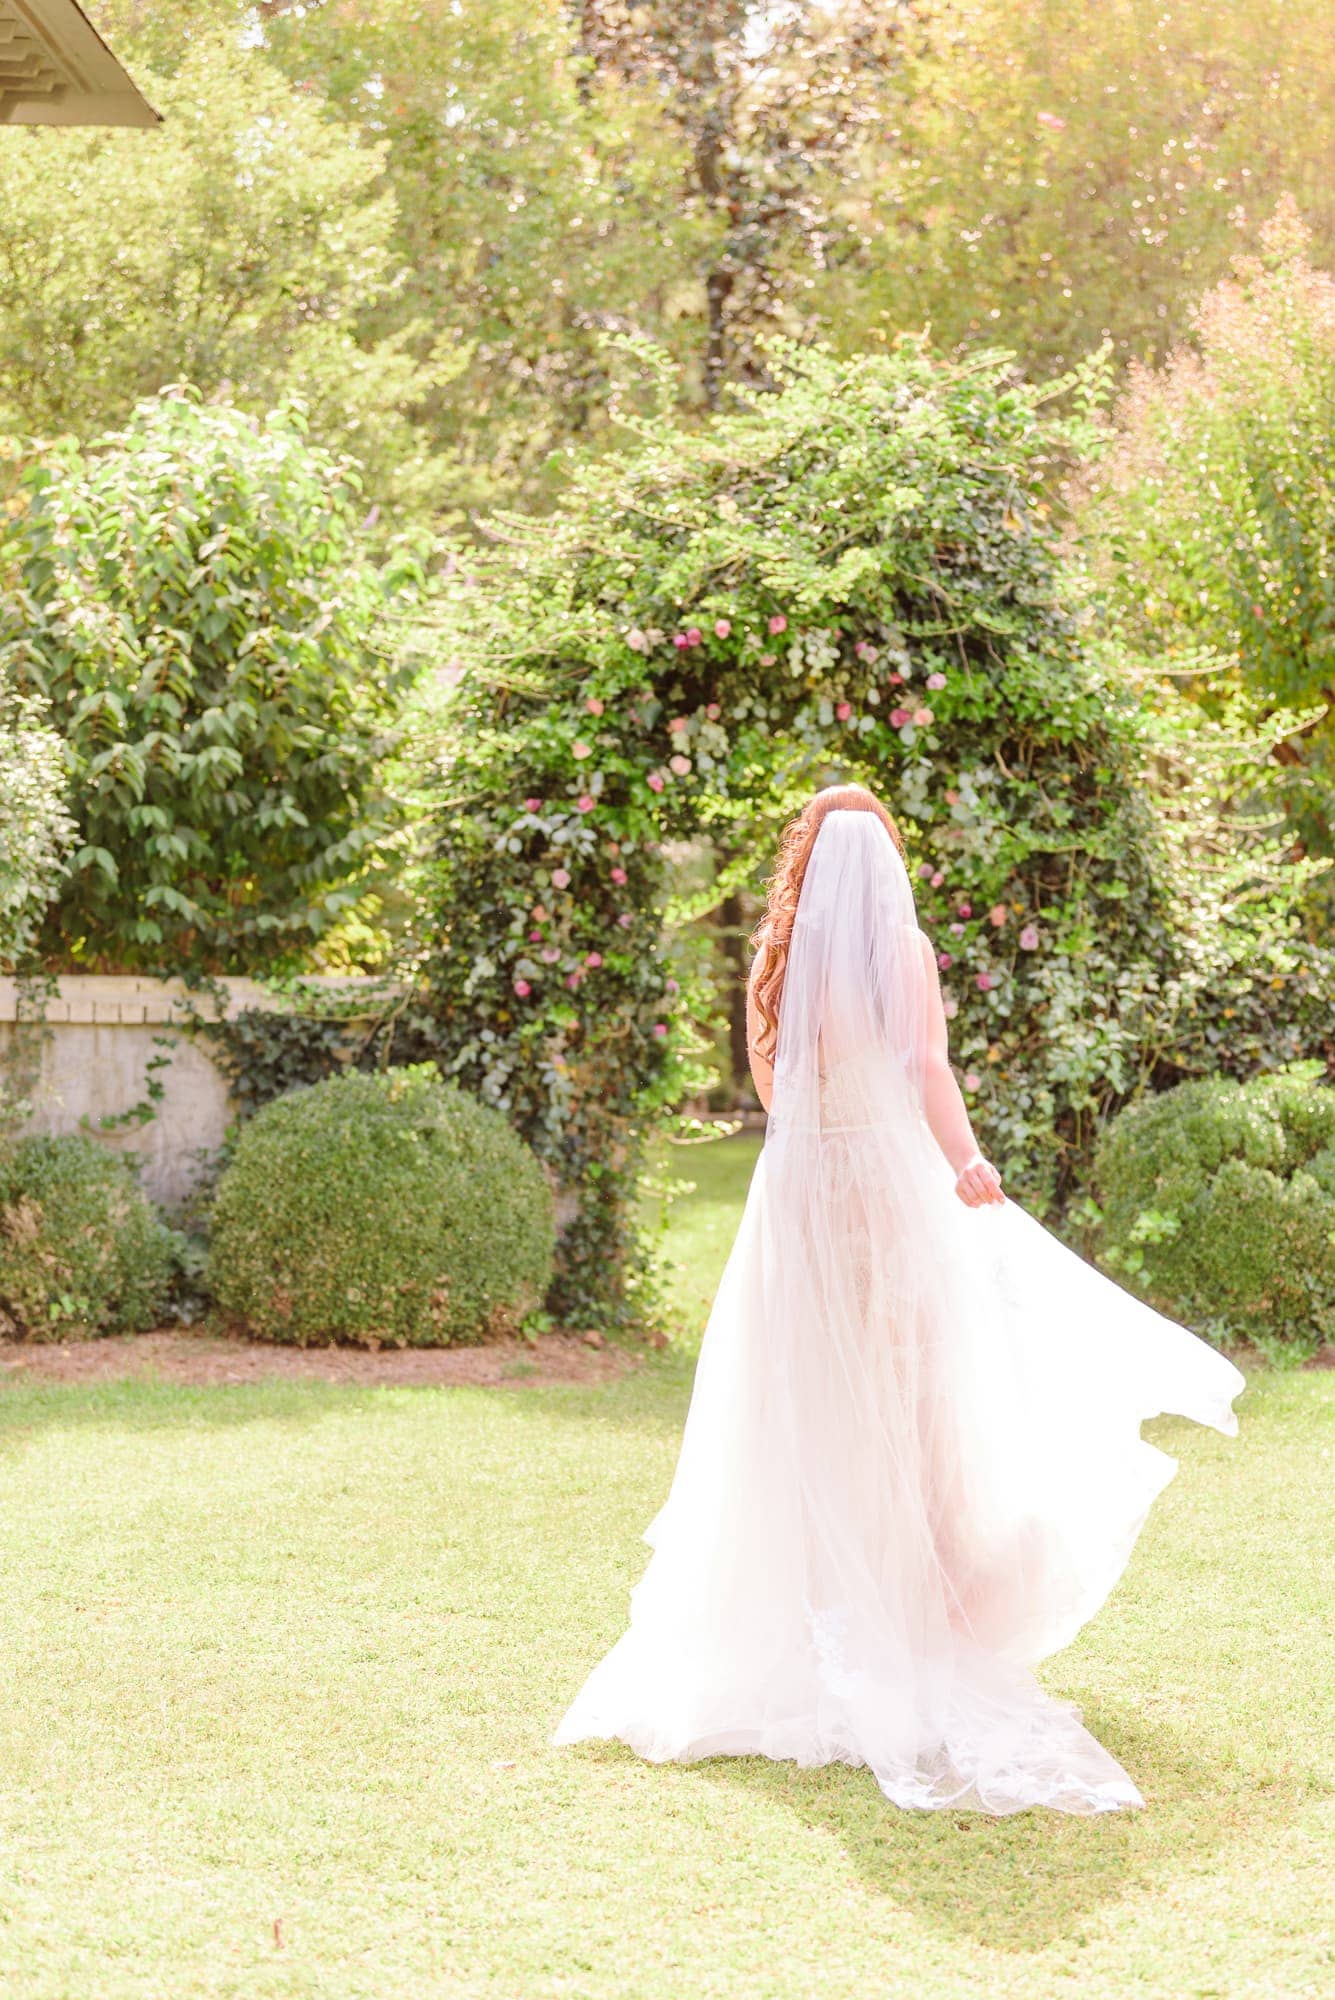 Olivia runs towards the floral archway on the grounds of the Key Rose Estate venue.